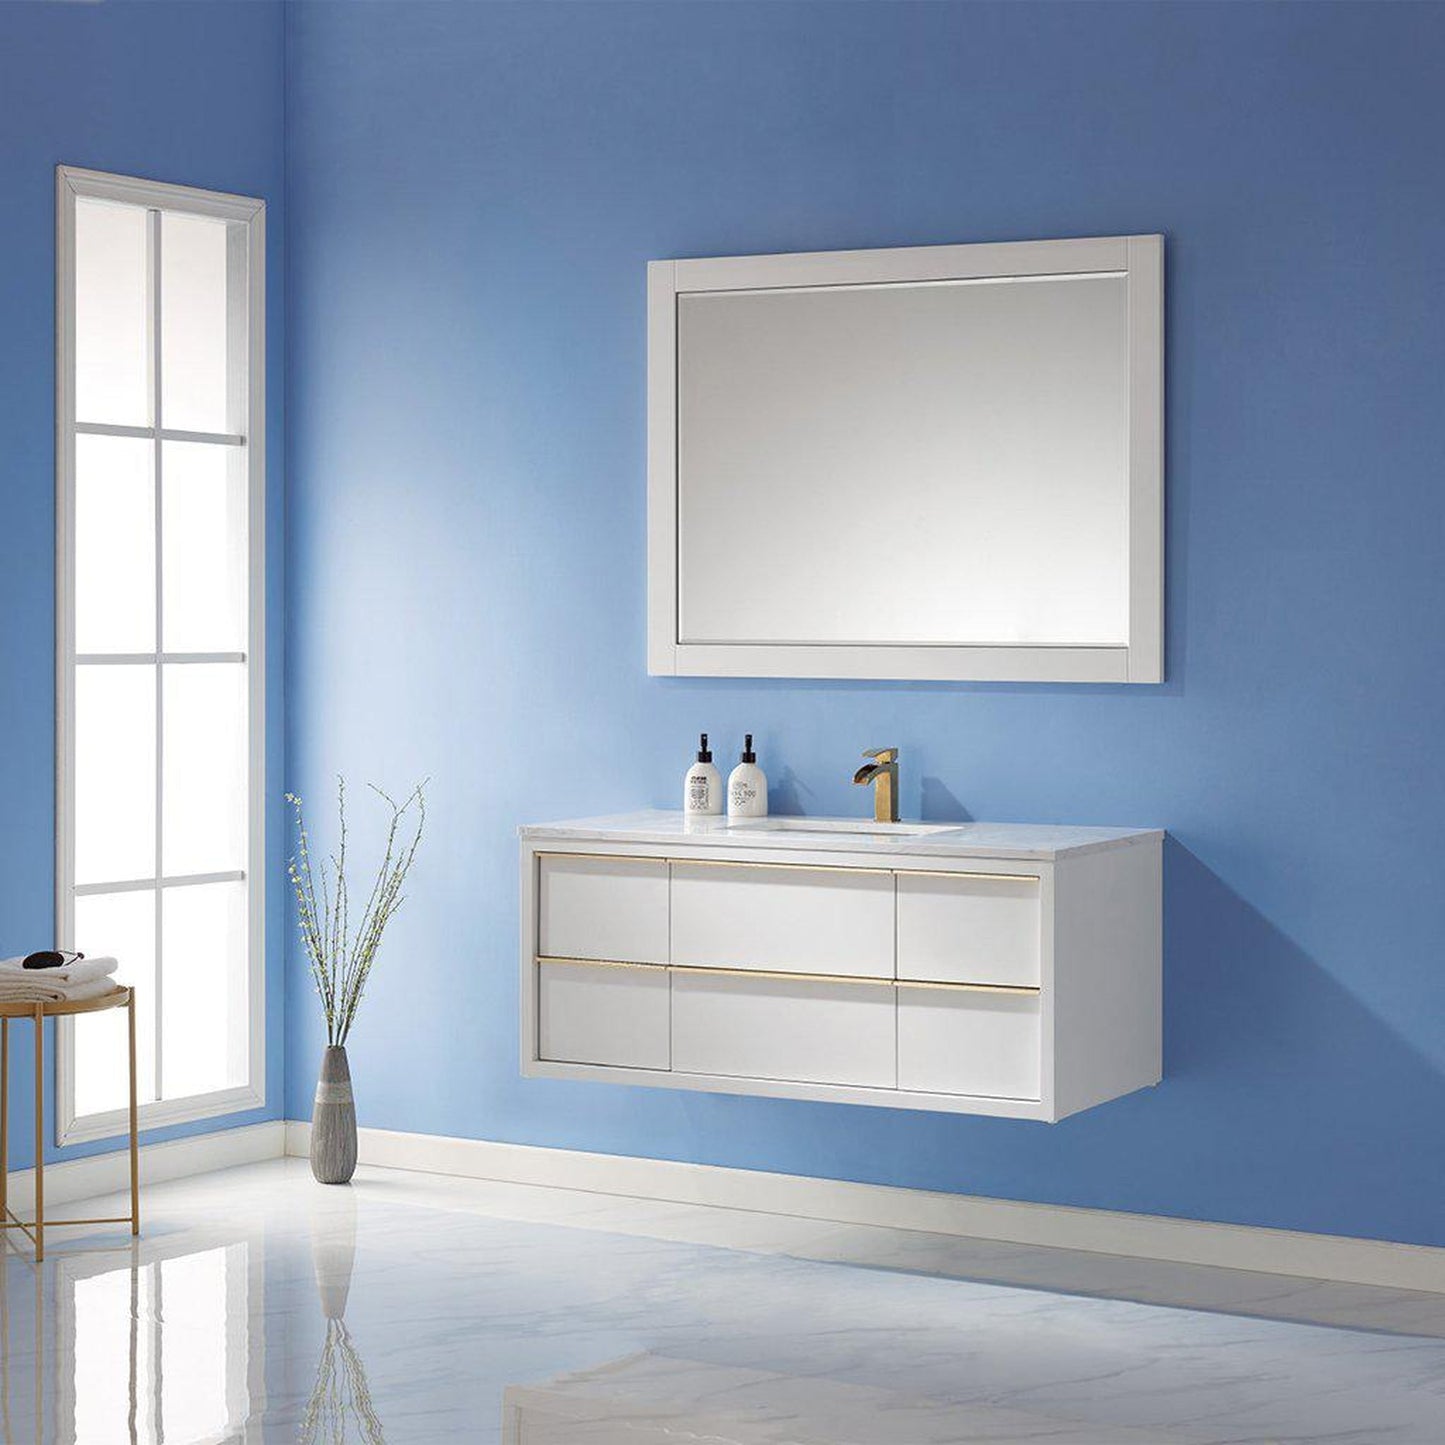 Altair Morgan 48" Single White Wall-Mounted Bathroom Vanity Set With Mirror, Aosta White Composite Stone Top, Rectangular Undermount Ceramic Sink, and Overflow